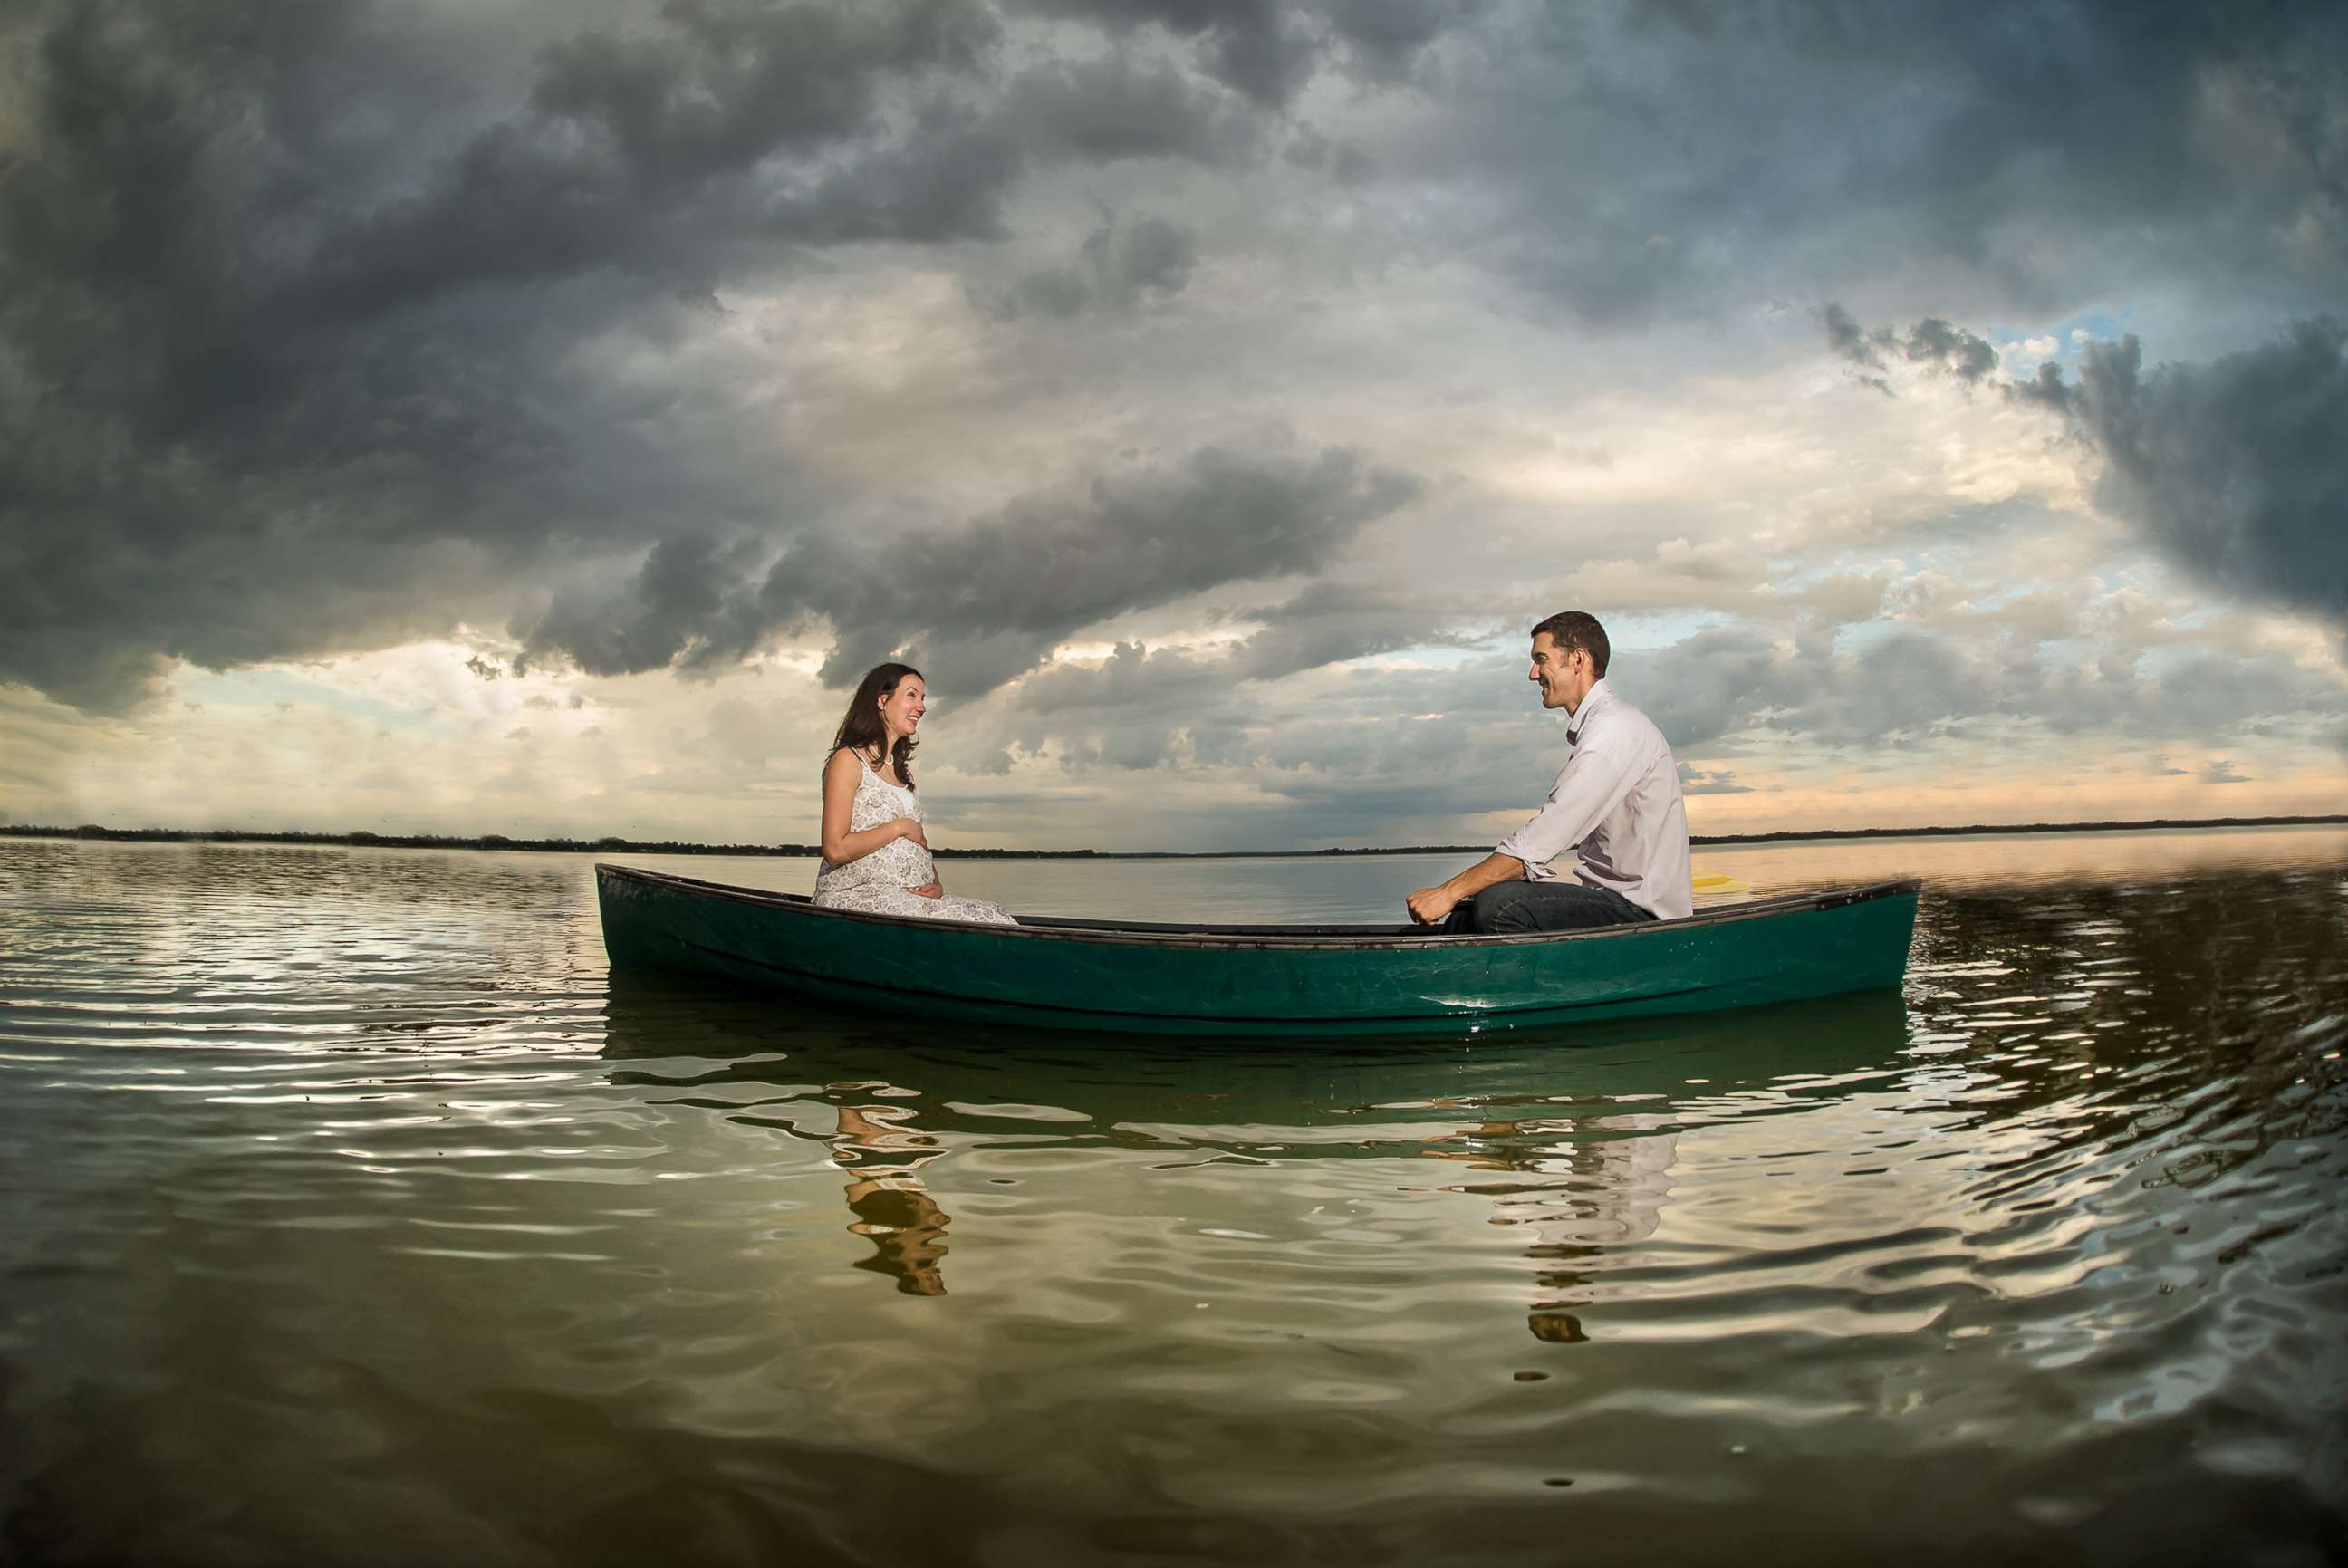 PHOTO: Suzanne and her husband Wes in a boat on Lake Dora in Florida.